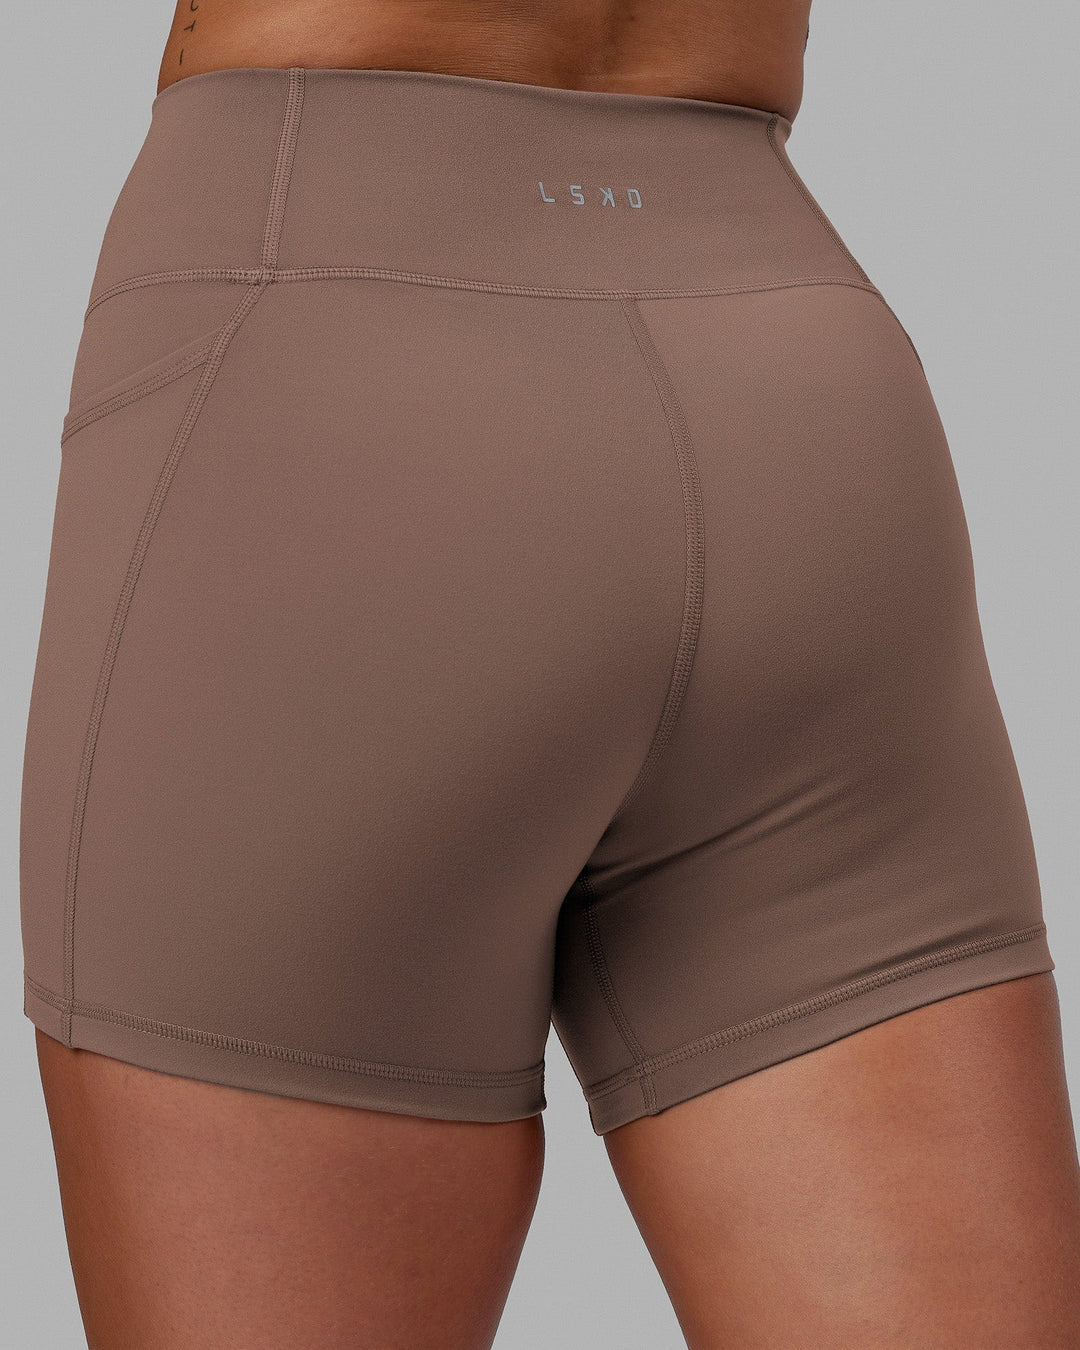 Woman wearing Fusion X-Short Tight - Deep Taupe